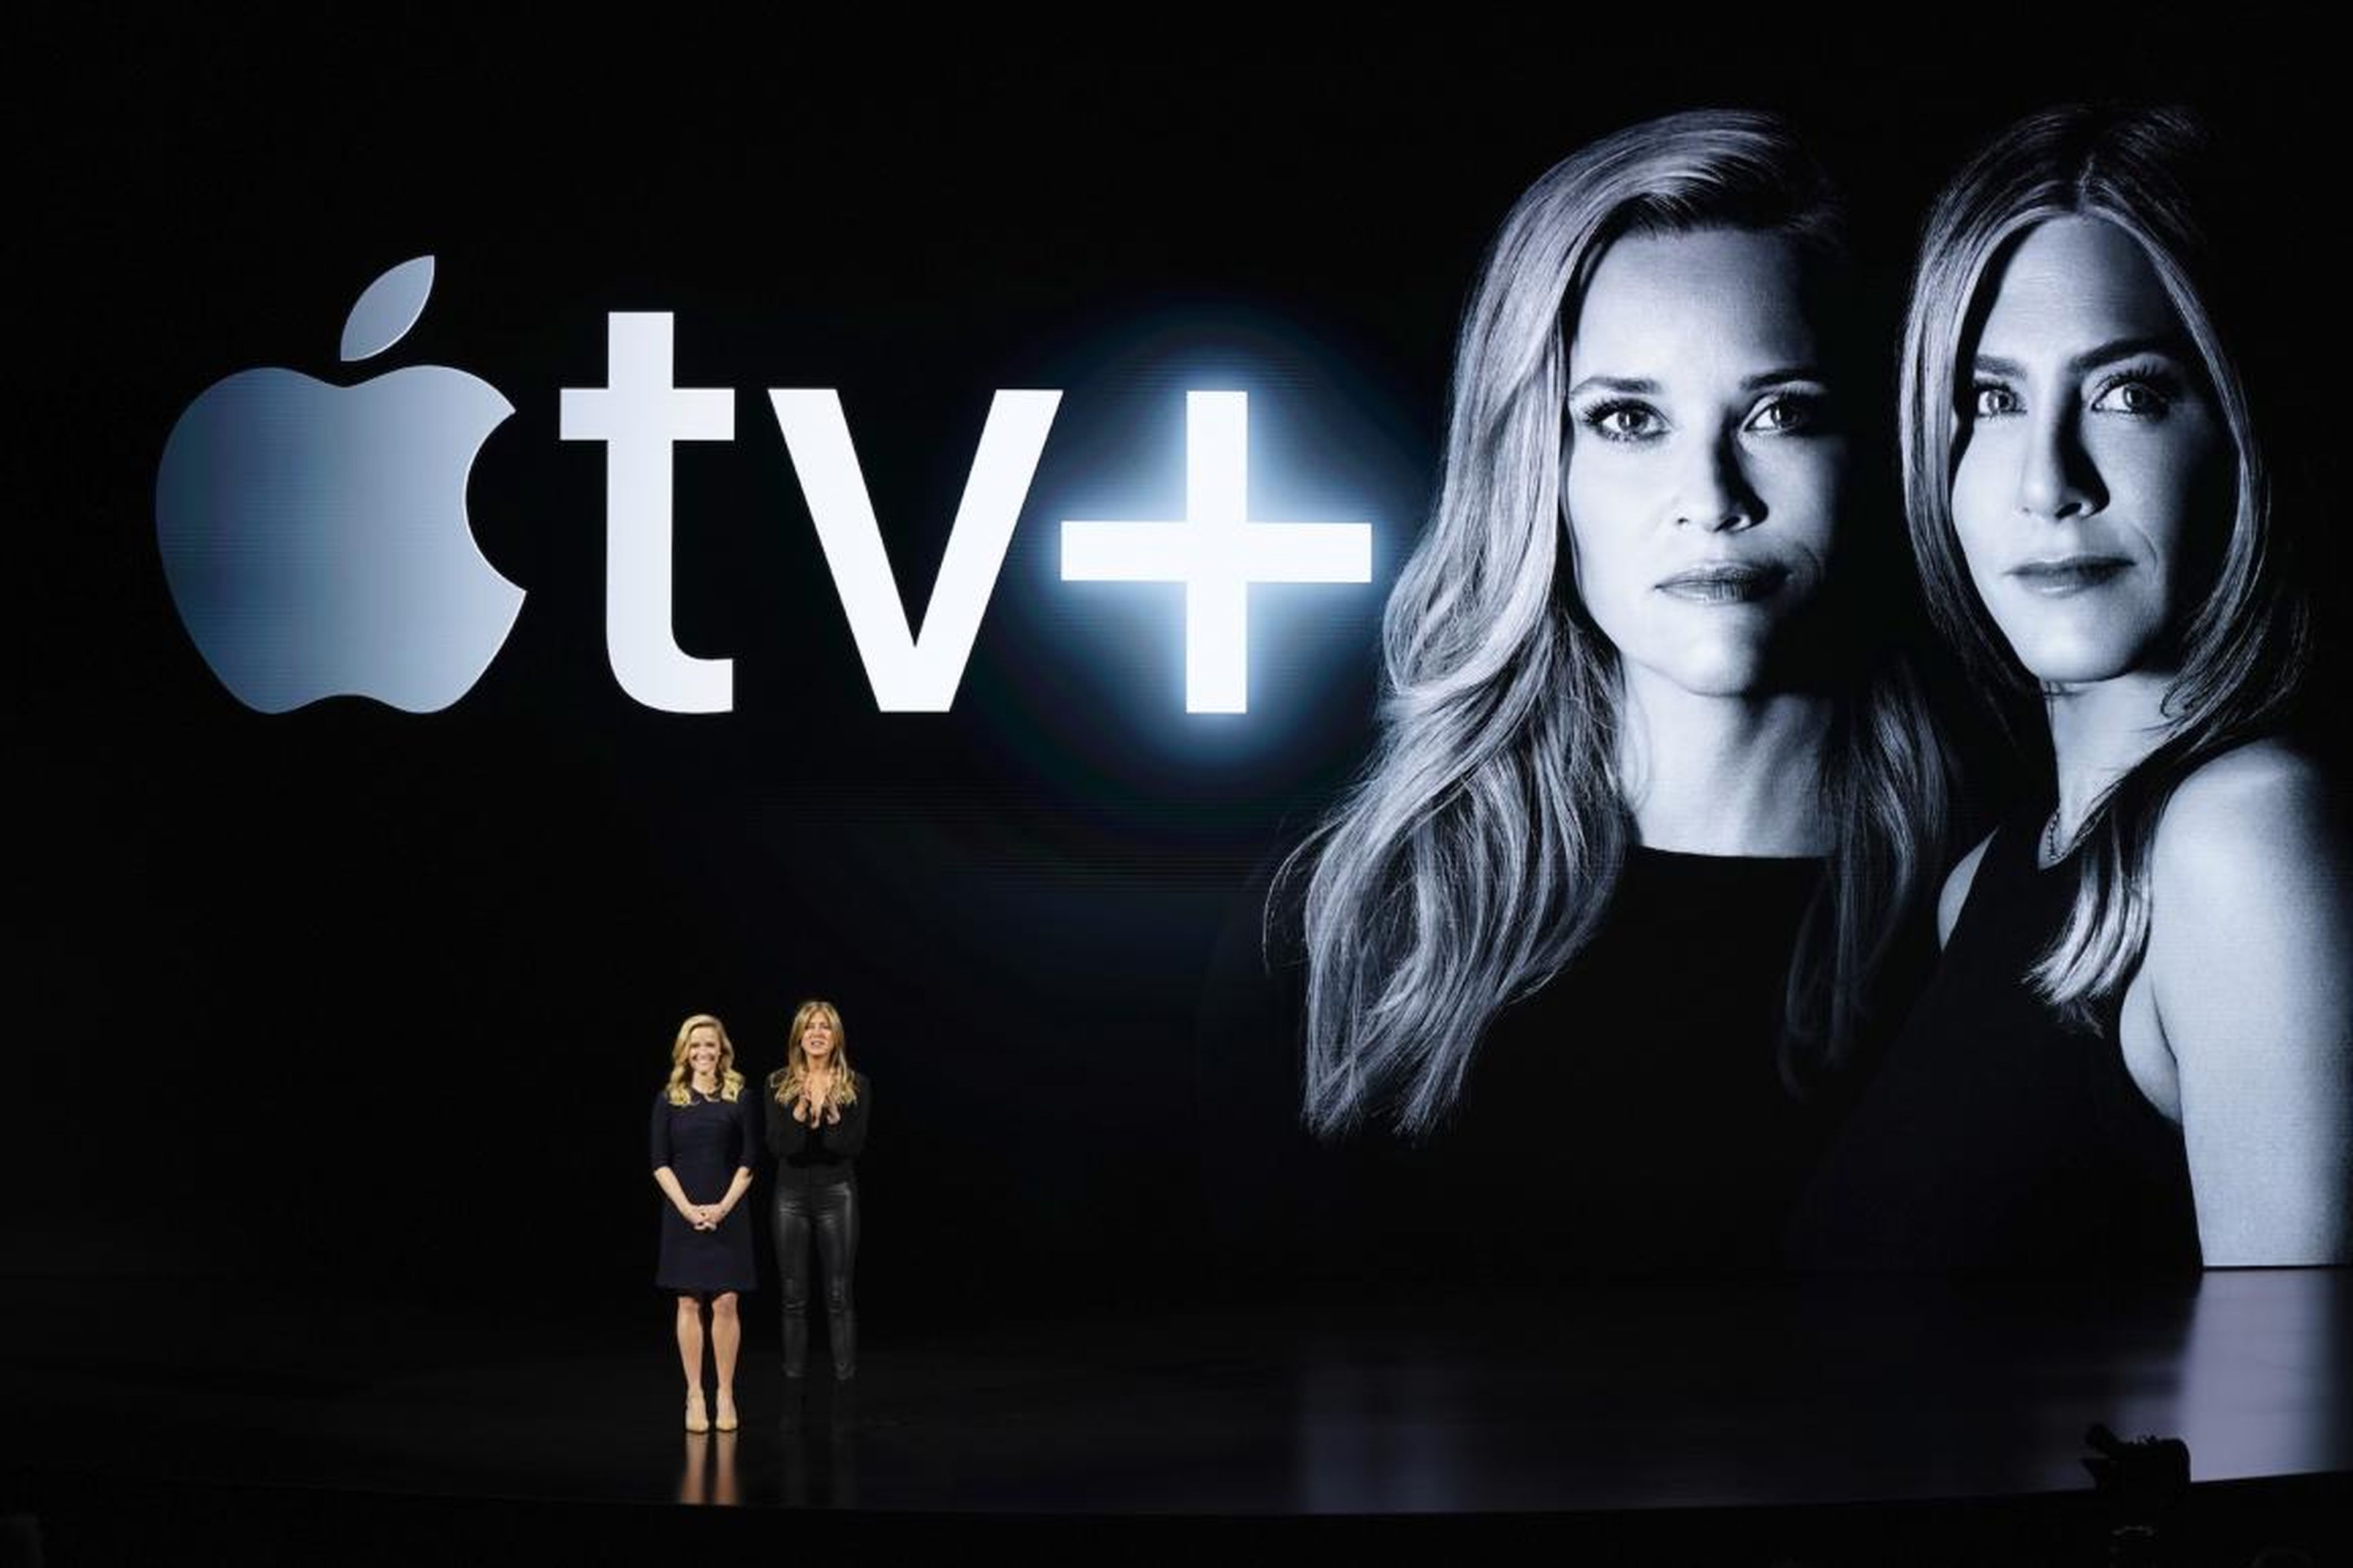 But there will probably be lingering questions about how well Apple's new services are faring, like Apple TV Plus.